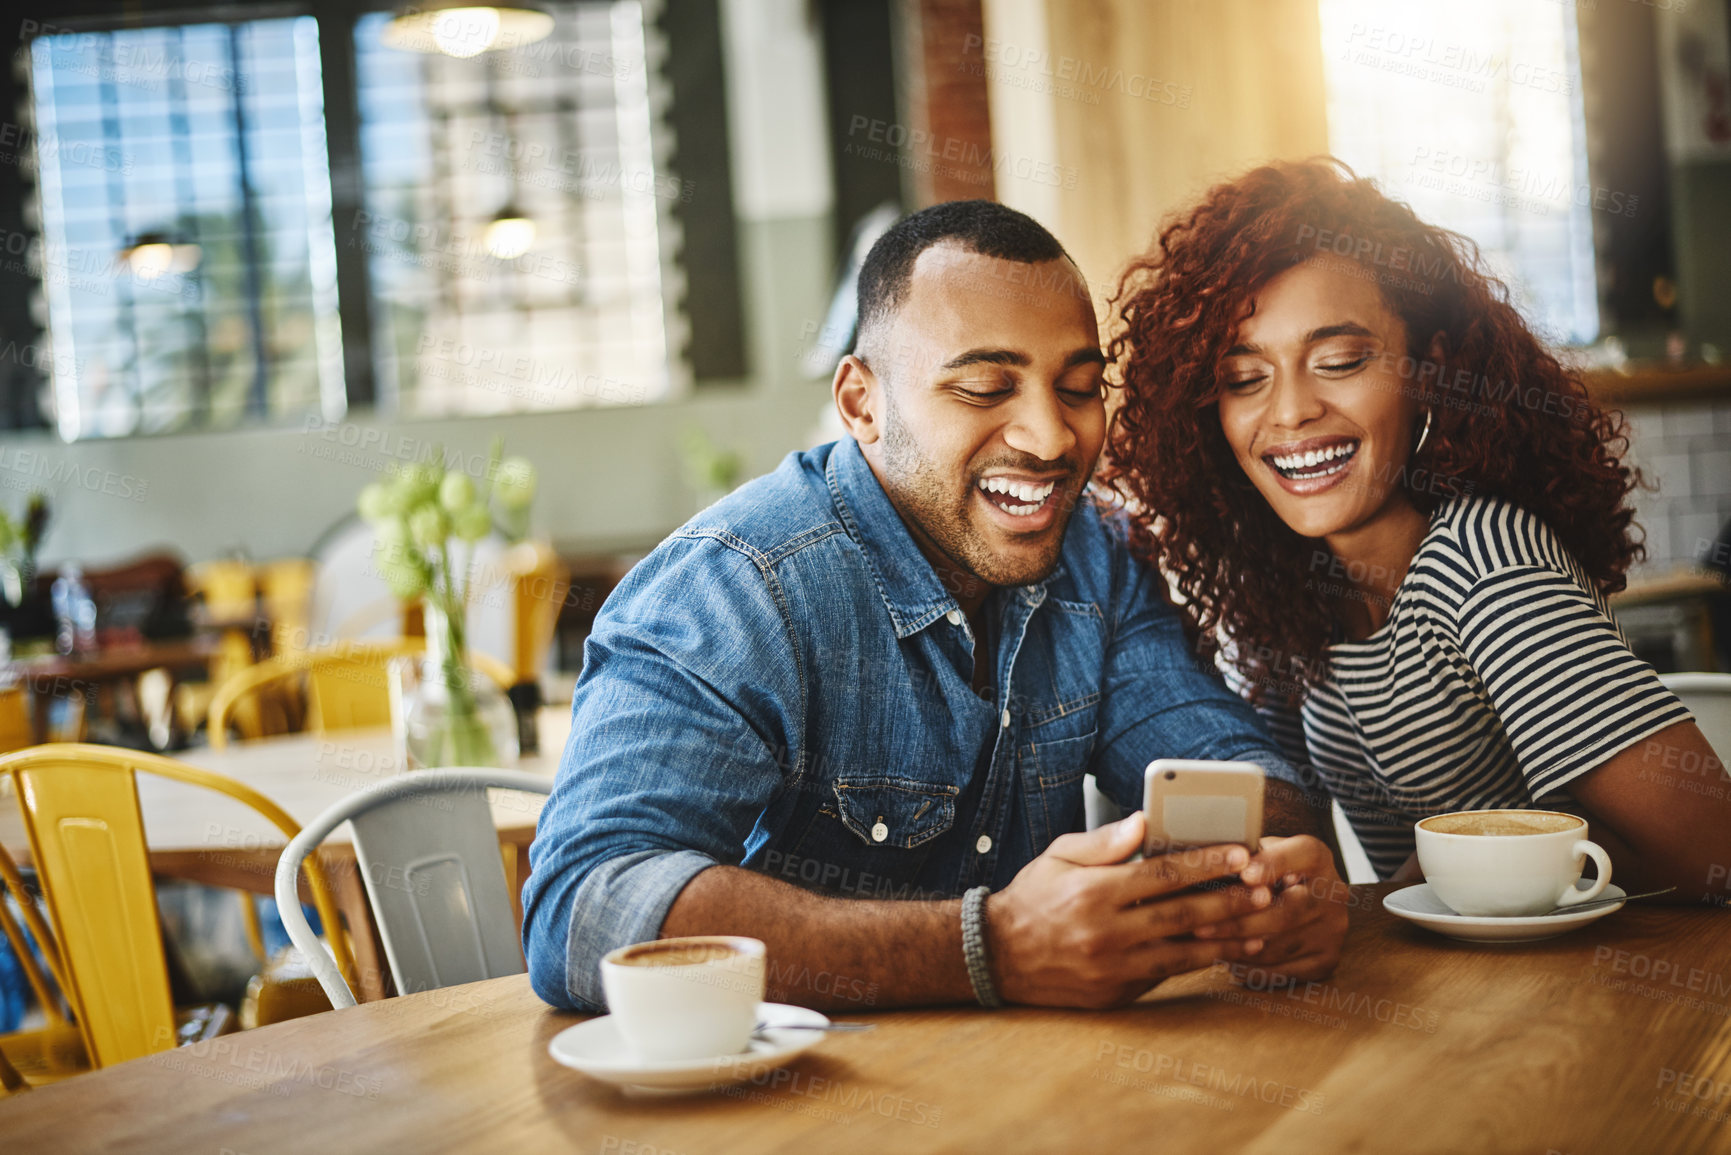 Buy stock photo Cropped shot of a happy young couple sitting together and using a cellphone during a coffee date at a cafe